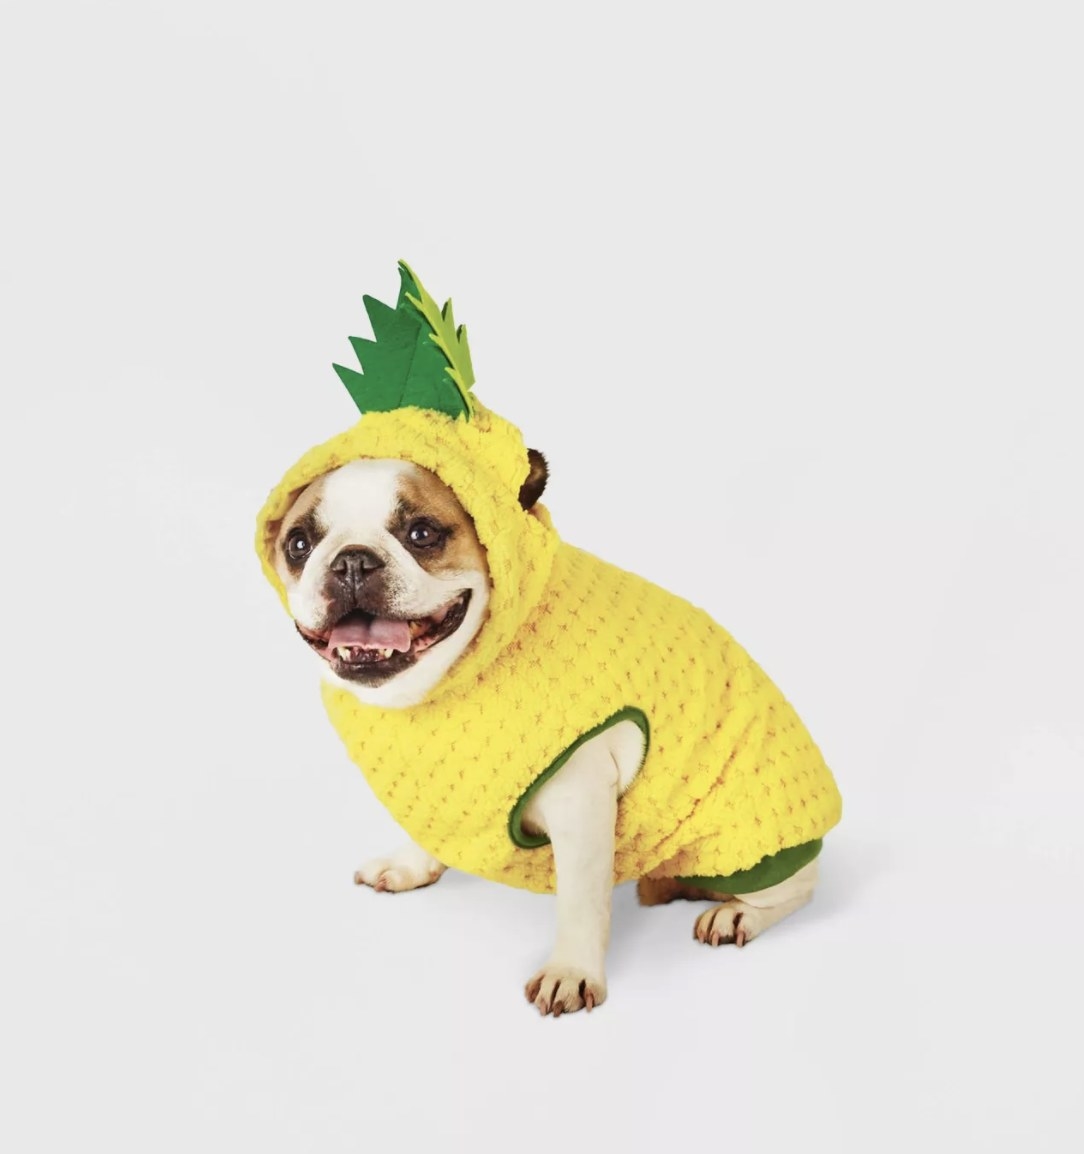 A small bulldog is wearing the fuzzy yellow pineapple outfit with green accents and a green crown